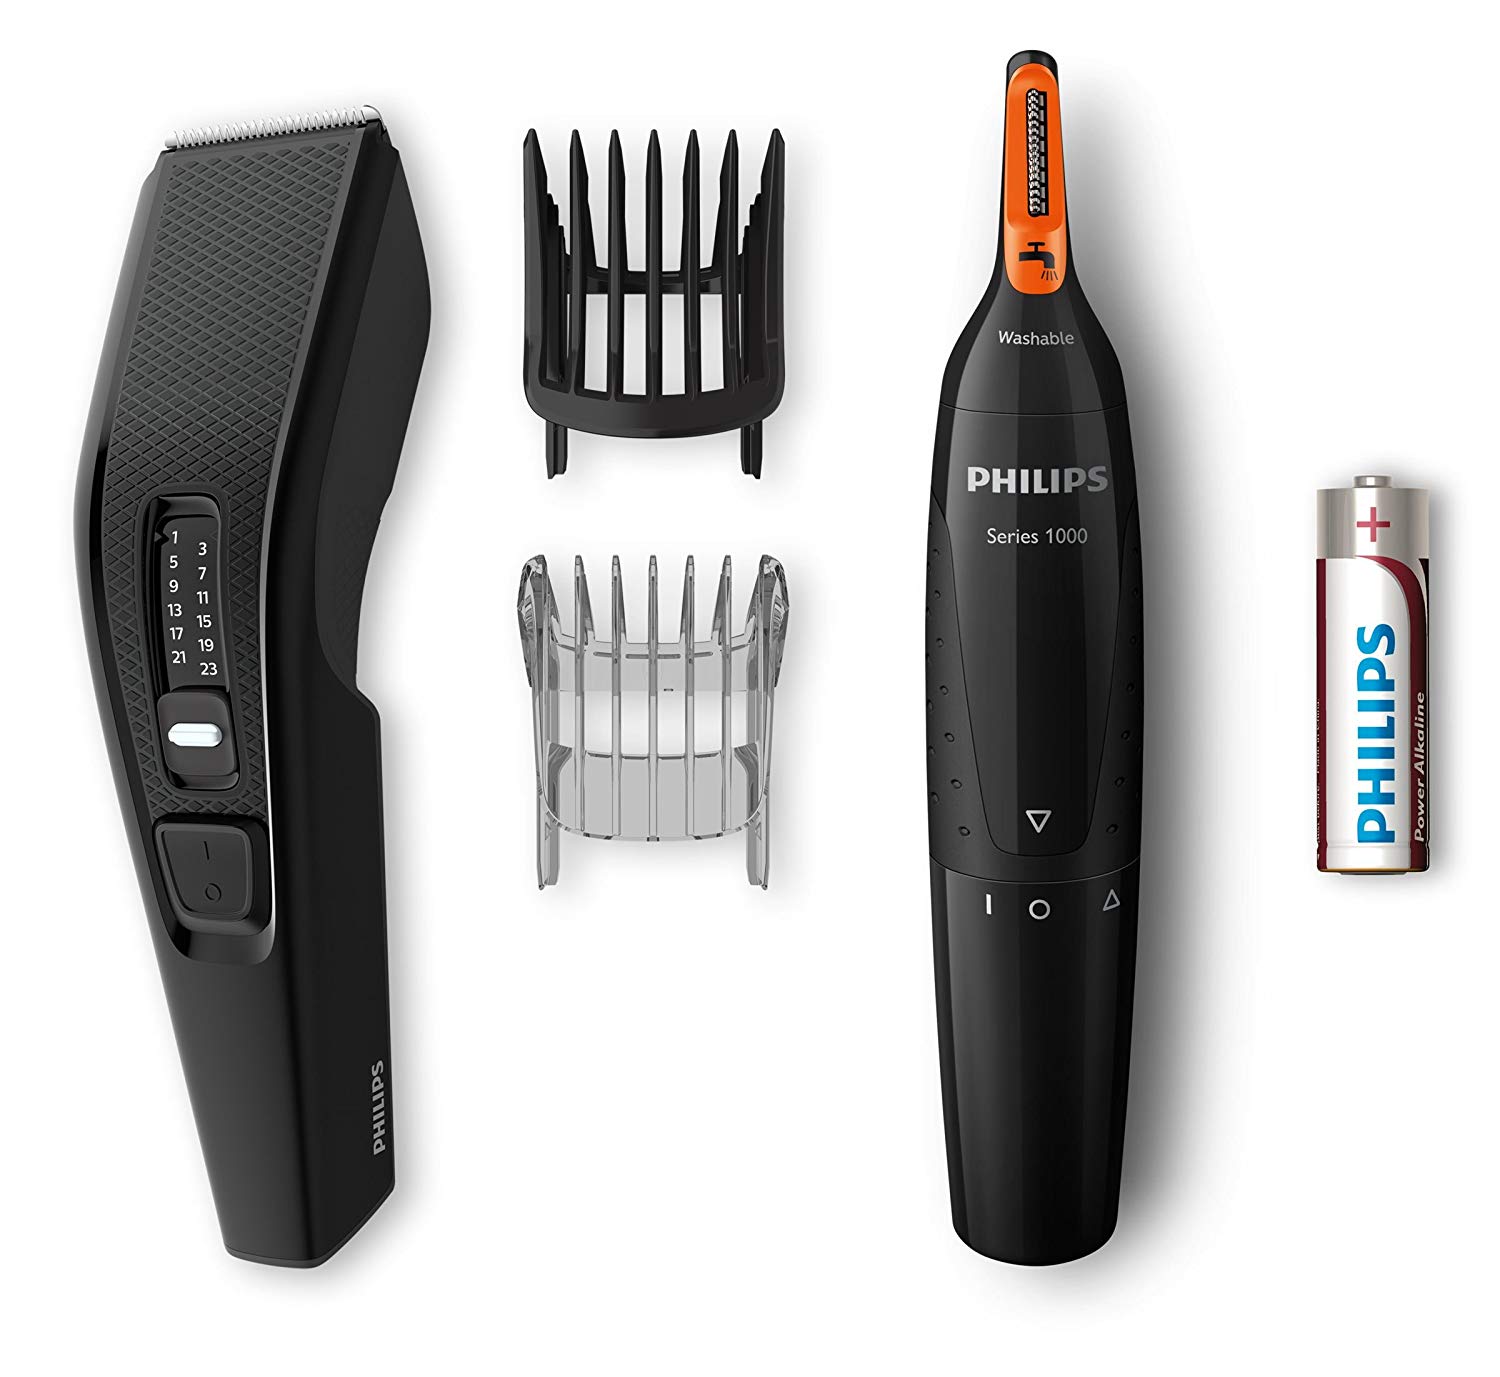 Pack cortaPelos y naricero Philips serie 3000 solo 18€